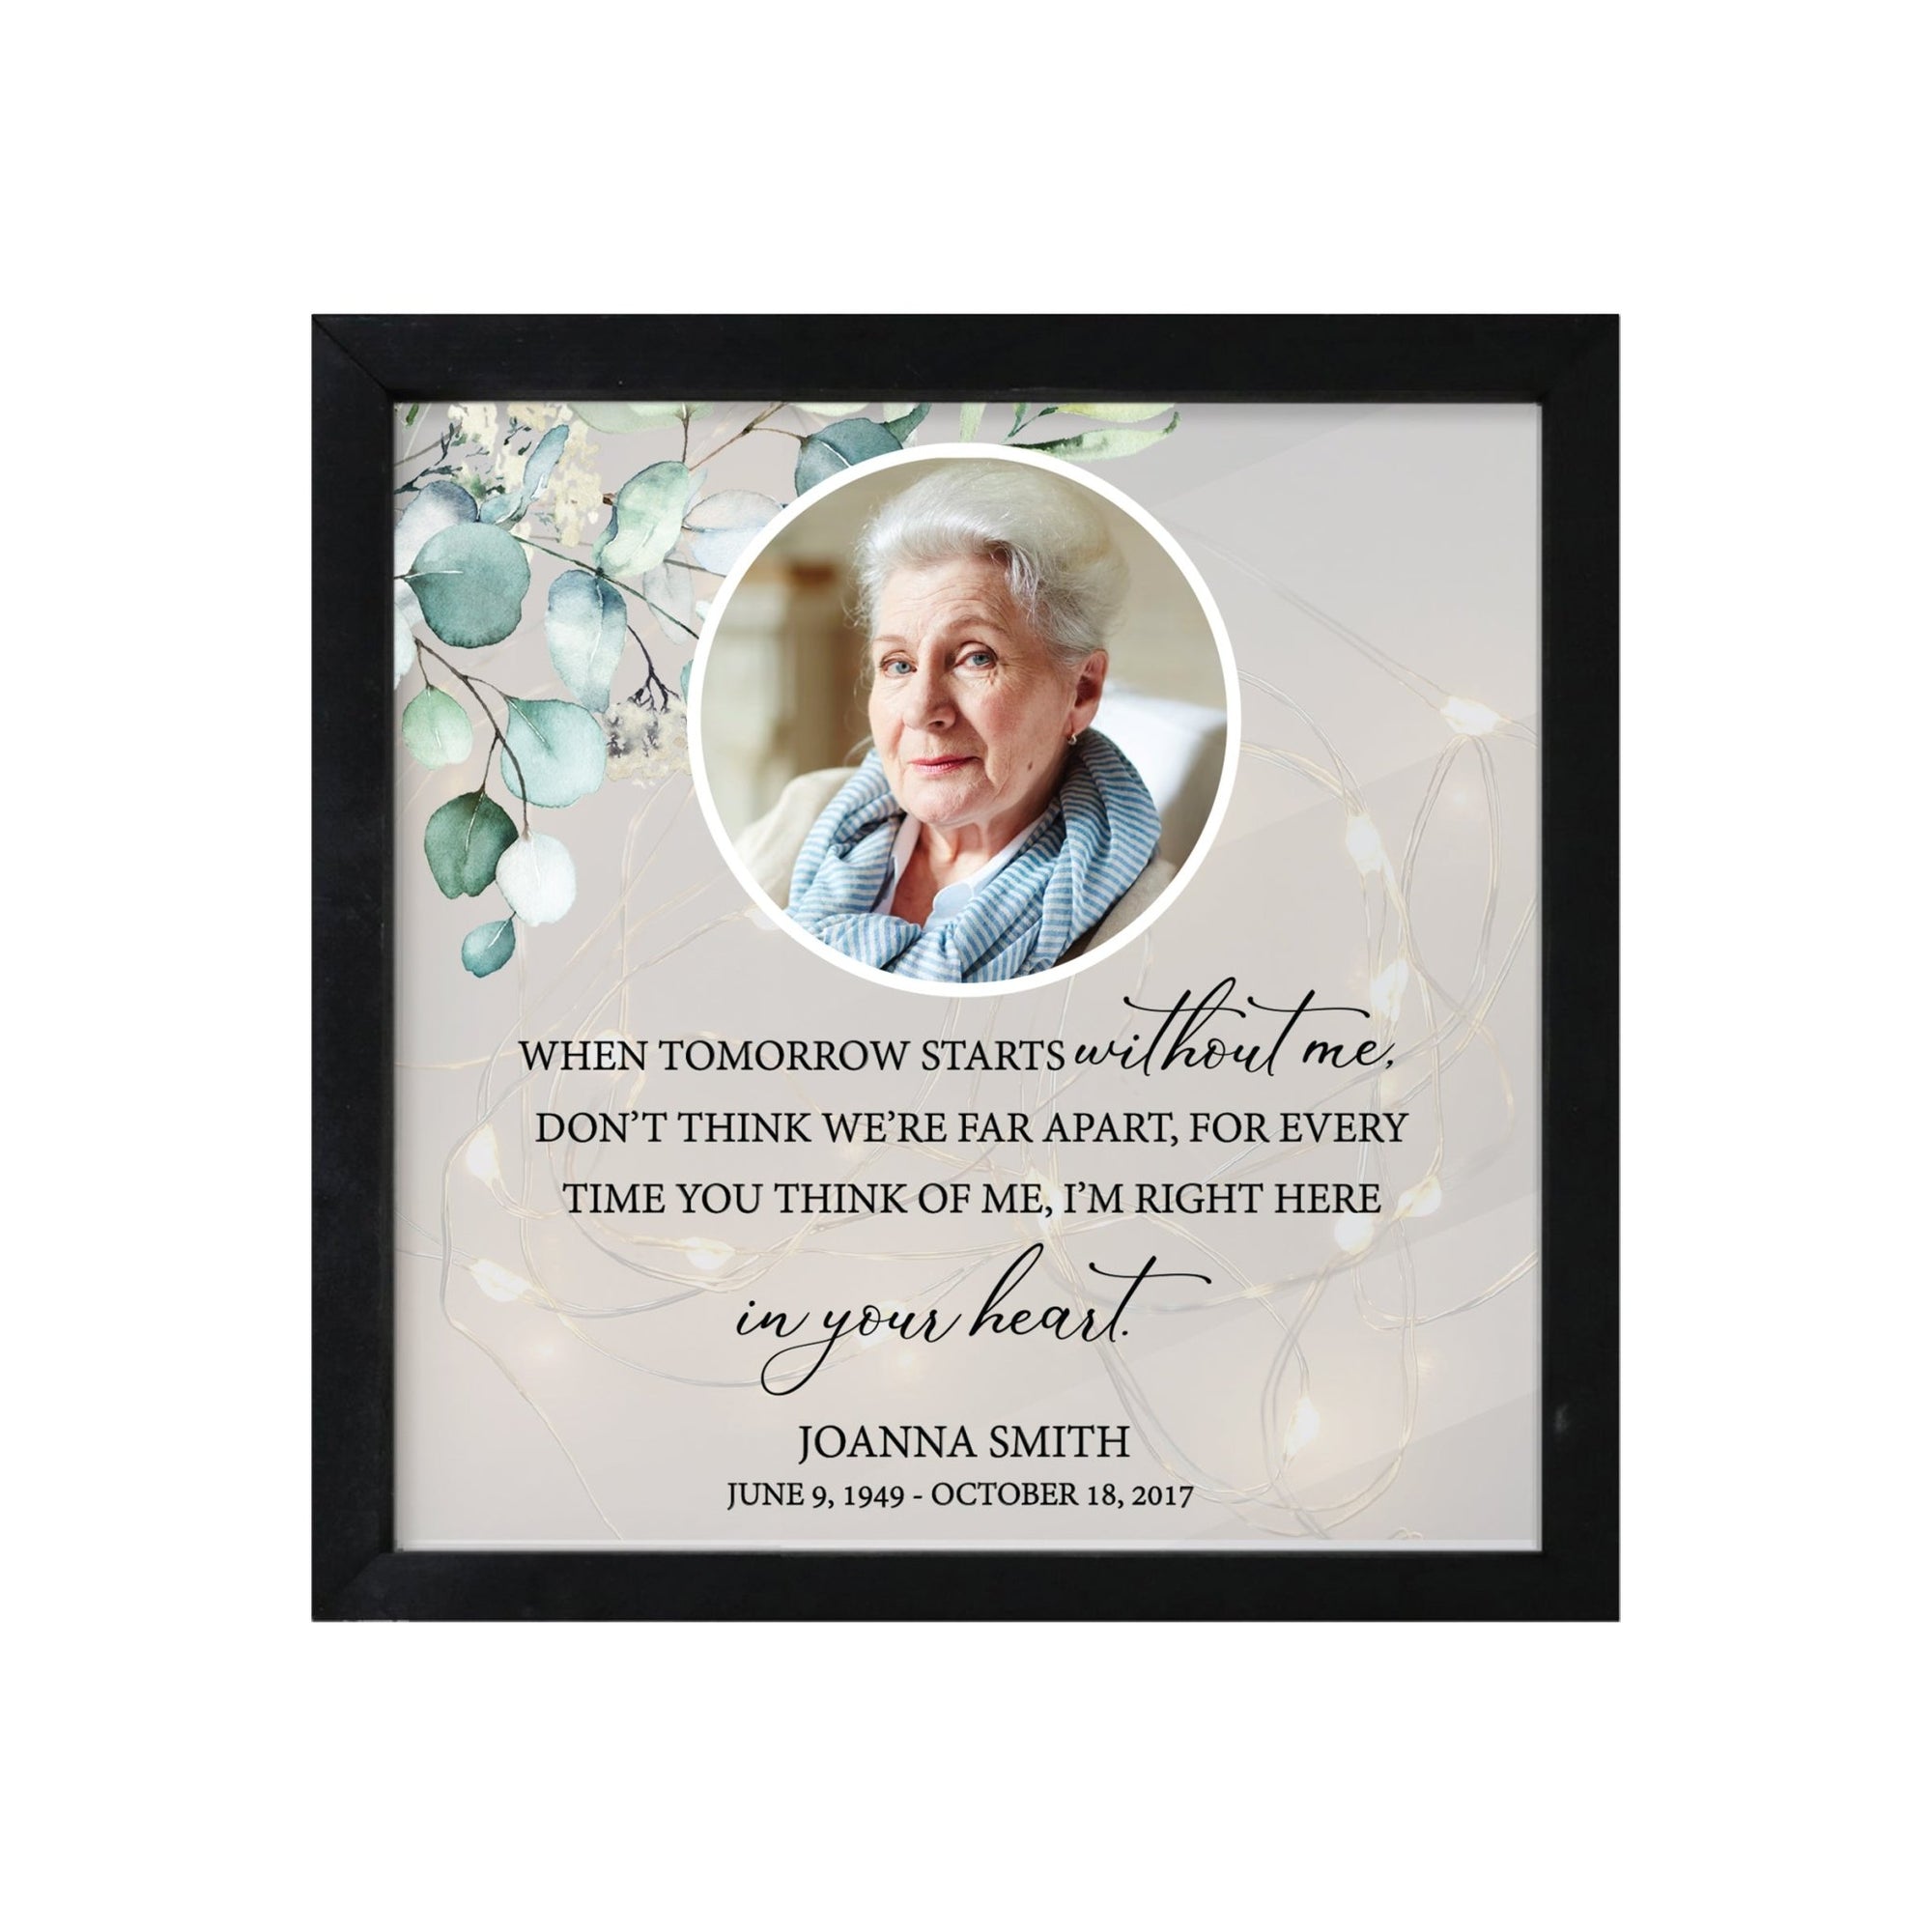 Personalized Memorial Black Framed Shadow Box With Lights Sympathy Gift & Wall Décor - When Tomorrow - LifeSong Milestones